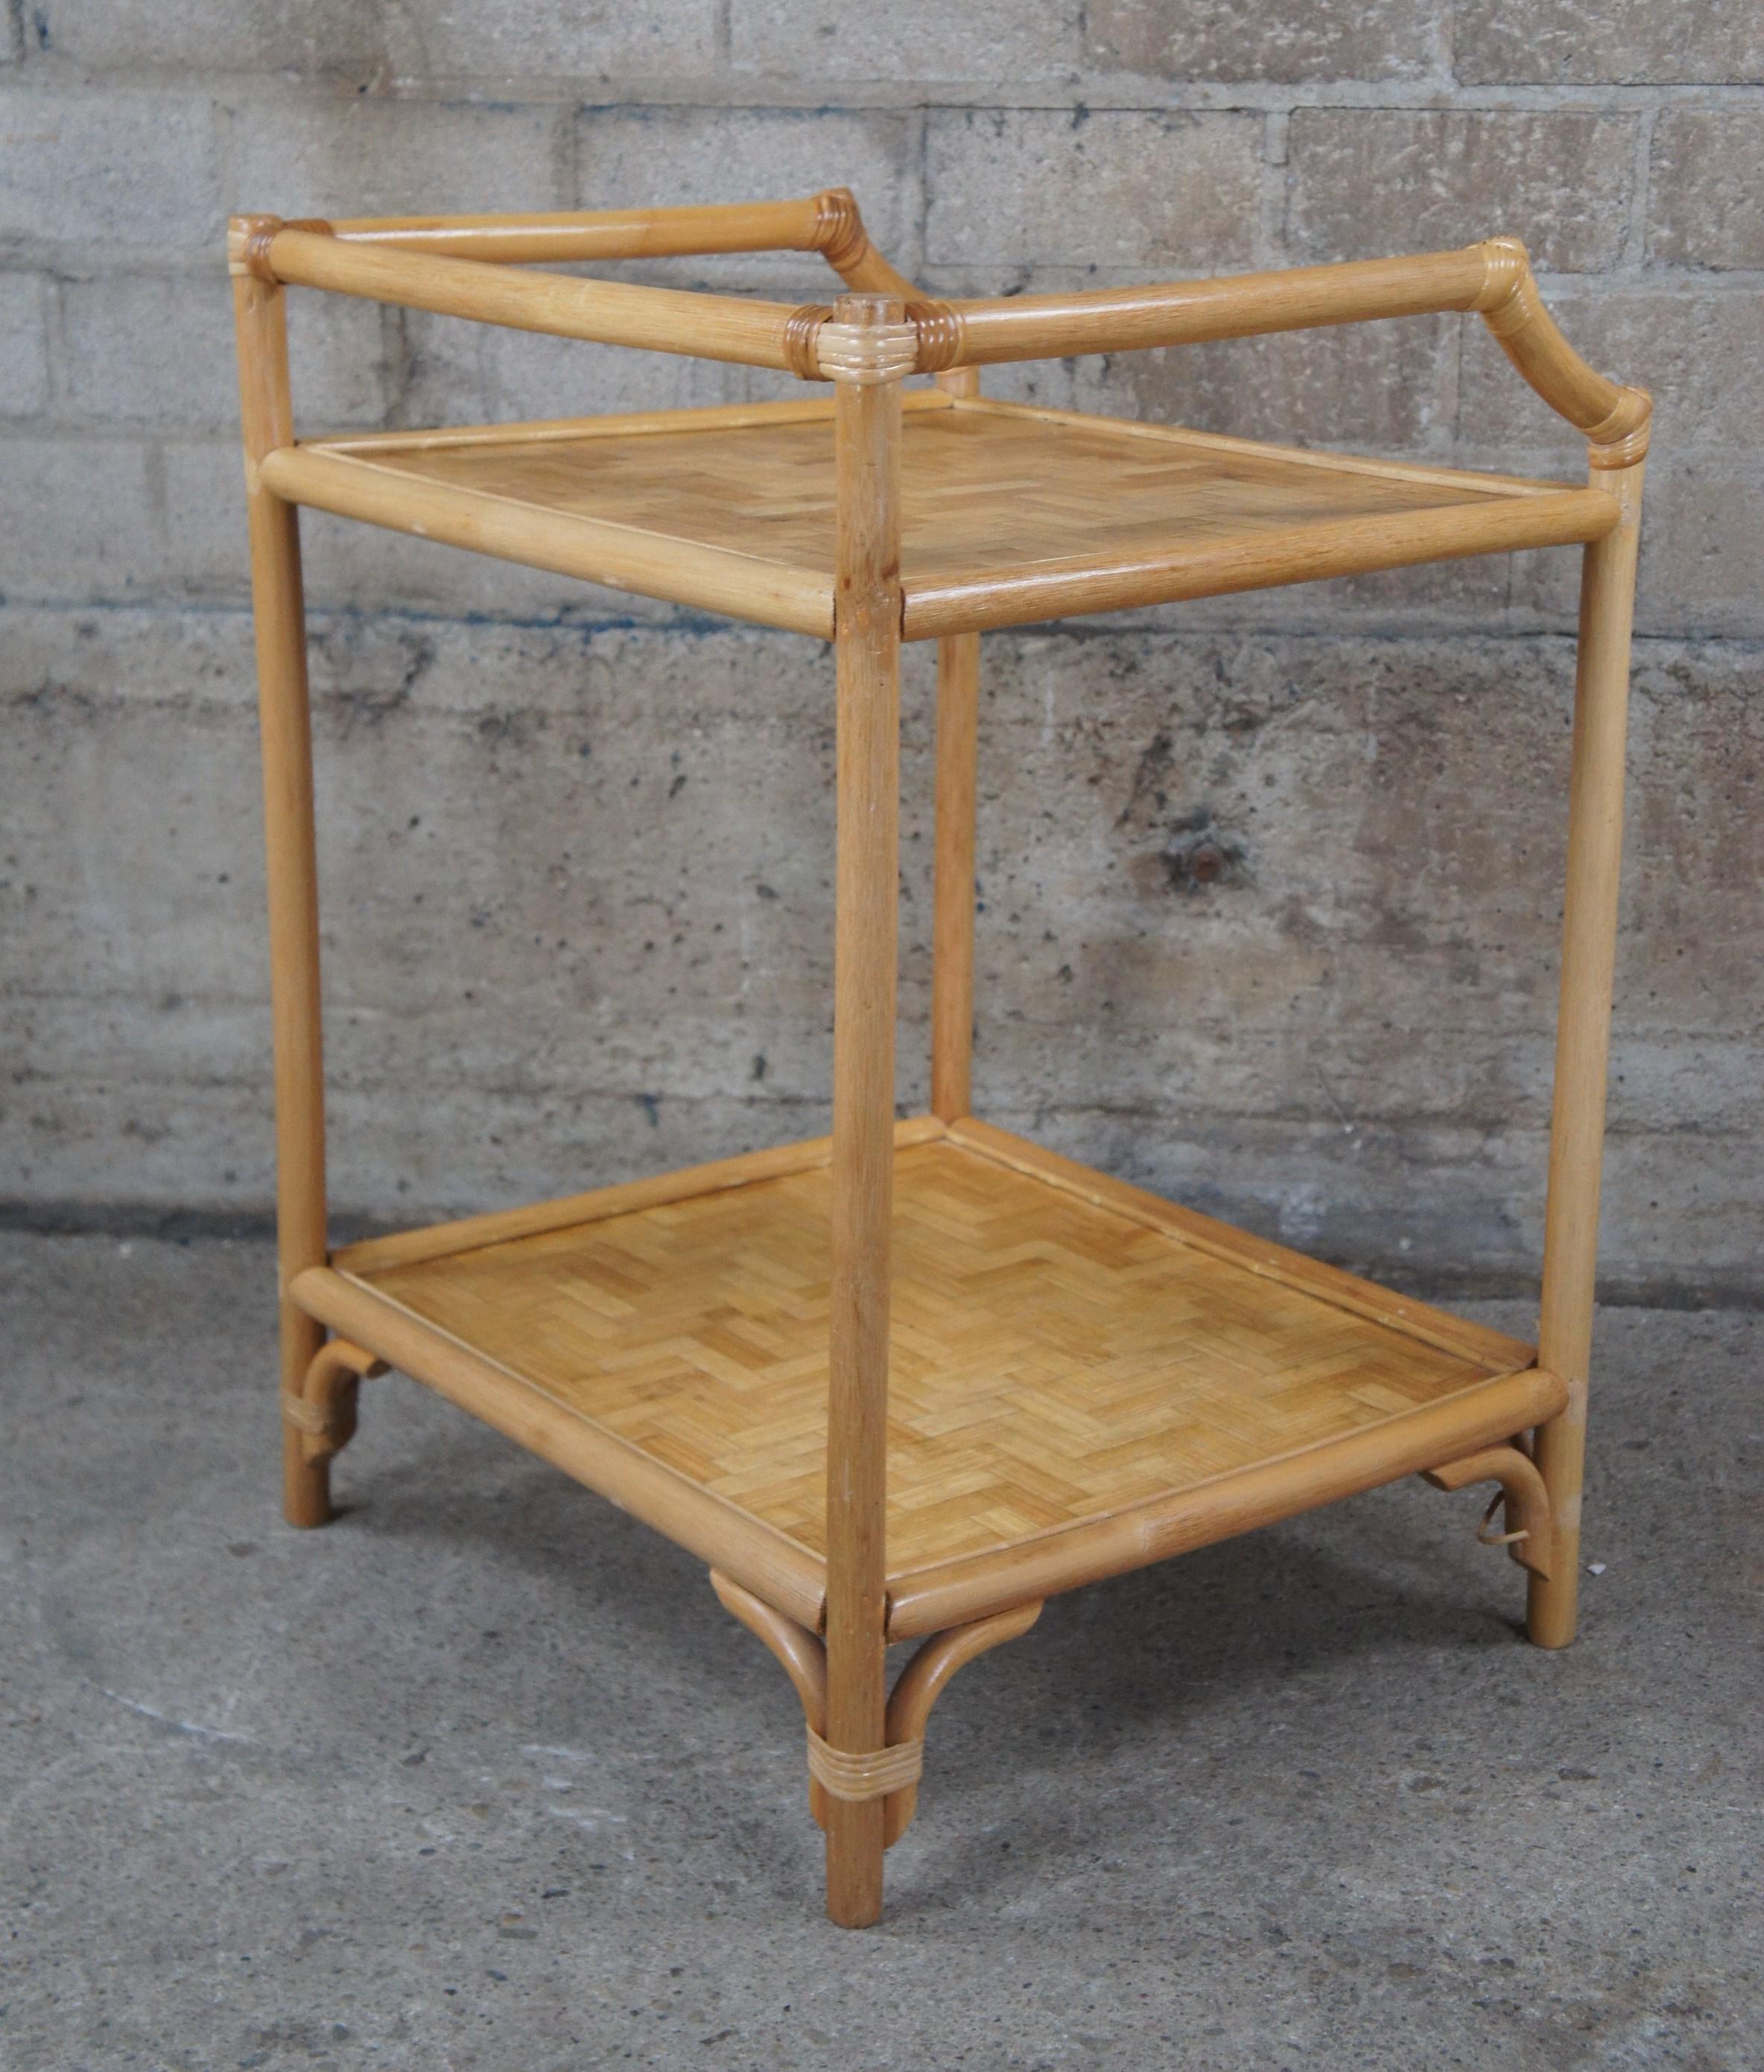 Vintage Bohemian Bamboo & Woven Rattan Etagere Side Table Plant Stand Boho Chic For Sale 2